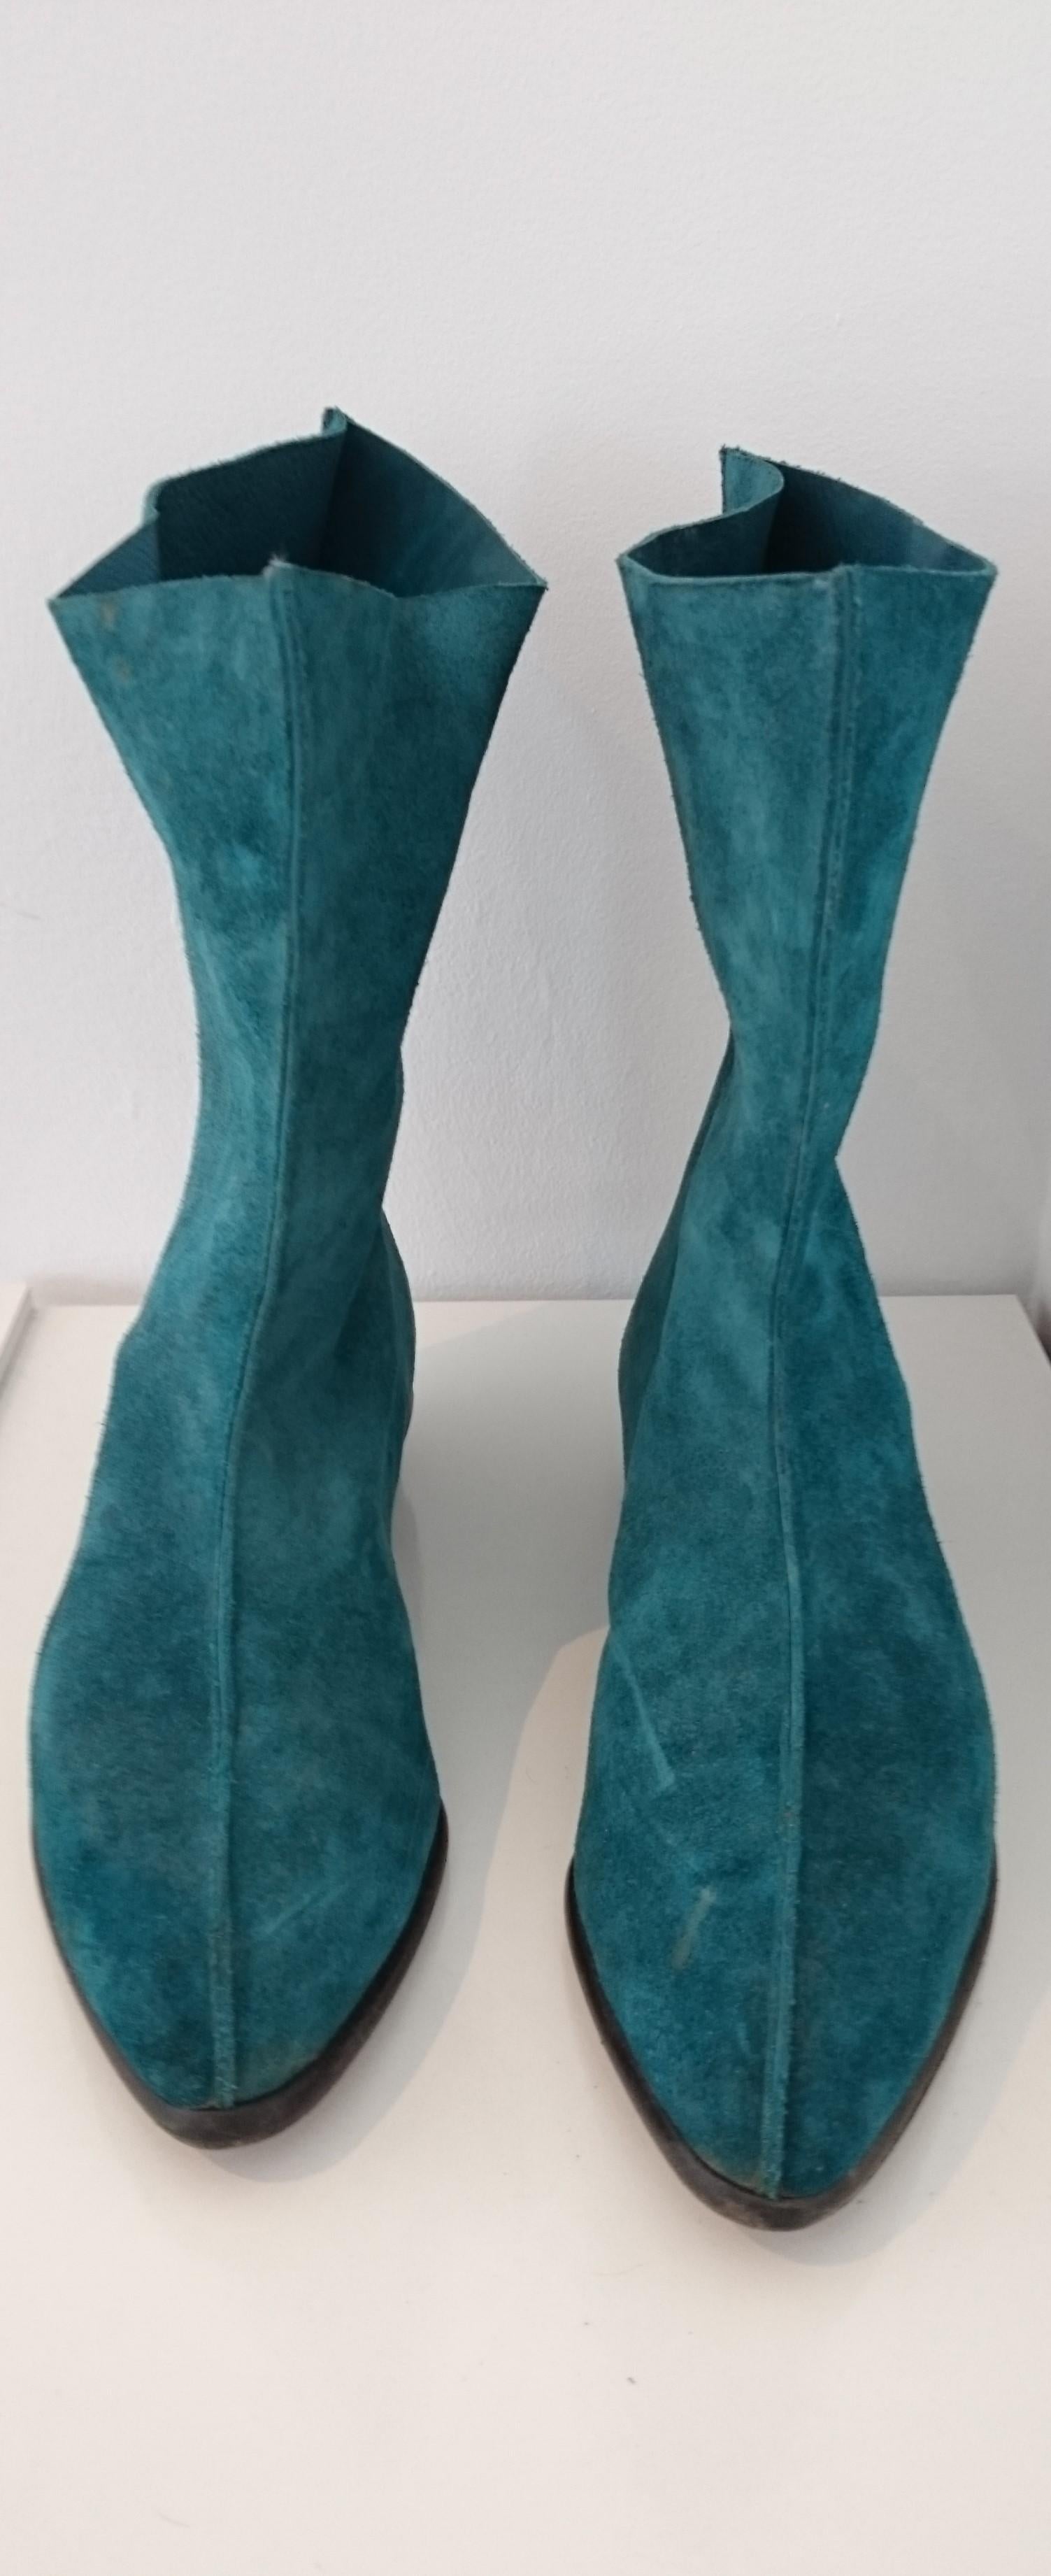 Women's Walter Steiger Suede Blue Boots. Excellent conditions. Size 39 For Sale